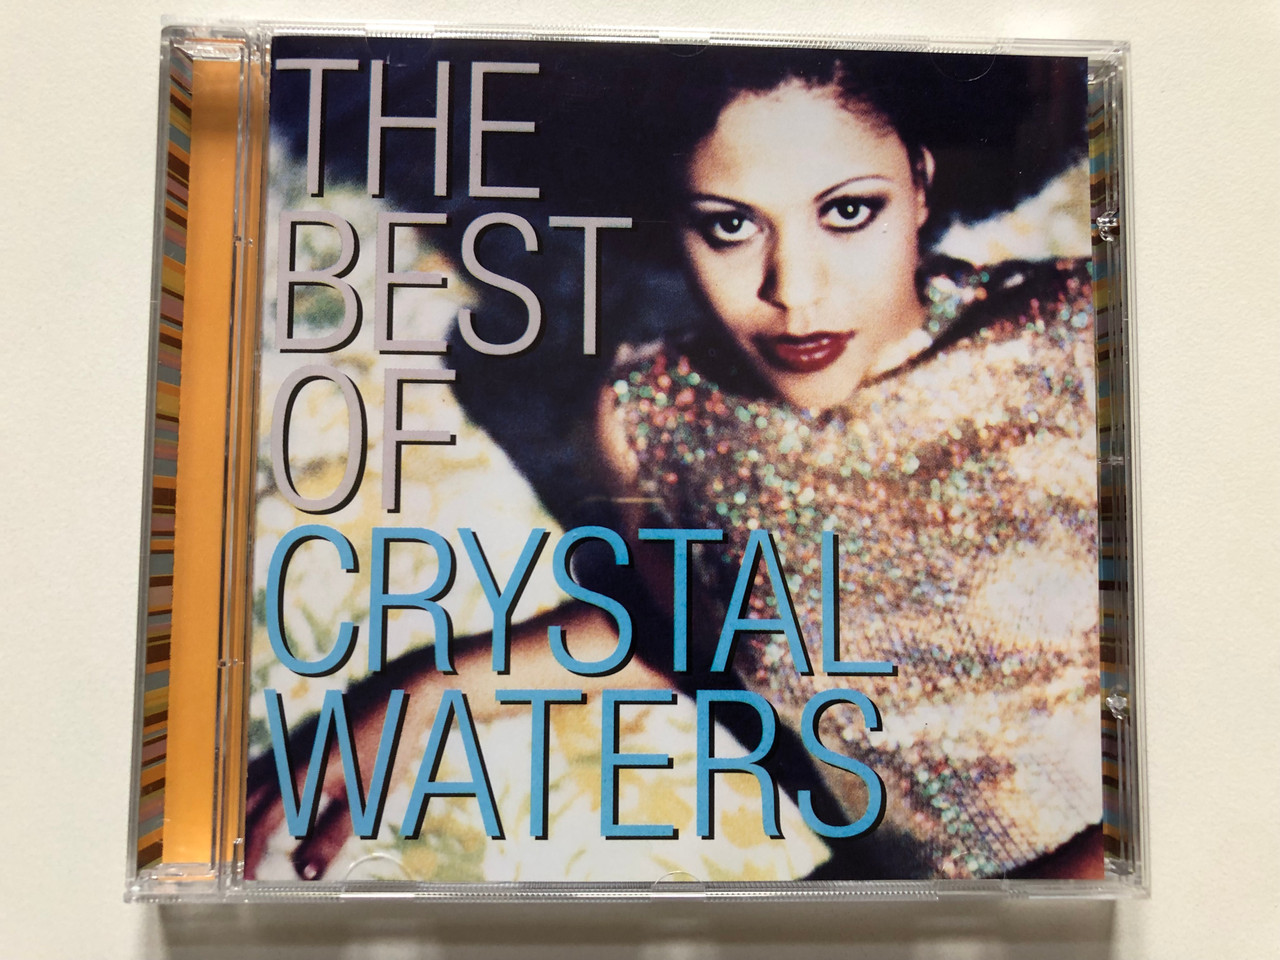 https://cdn10.bigcommerce.com/s-62bdpkt7pb/products/0/images/313272/The_Best_Of_Crystal_Waters_Mercury_Audio_CD_1998_558_194-2_1__27235.1700647454.1280.1280.JPG?c=2